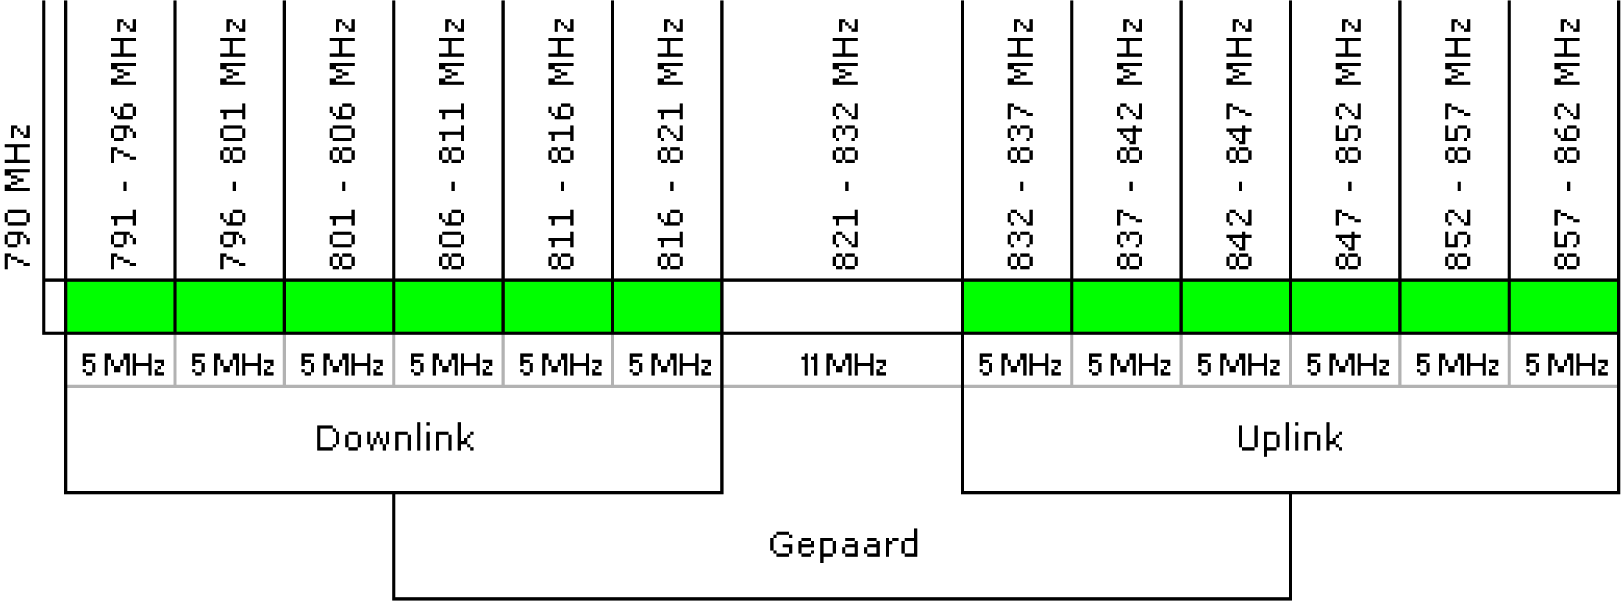 Tabel 2: 800 MHz band